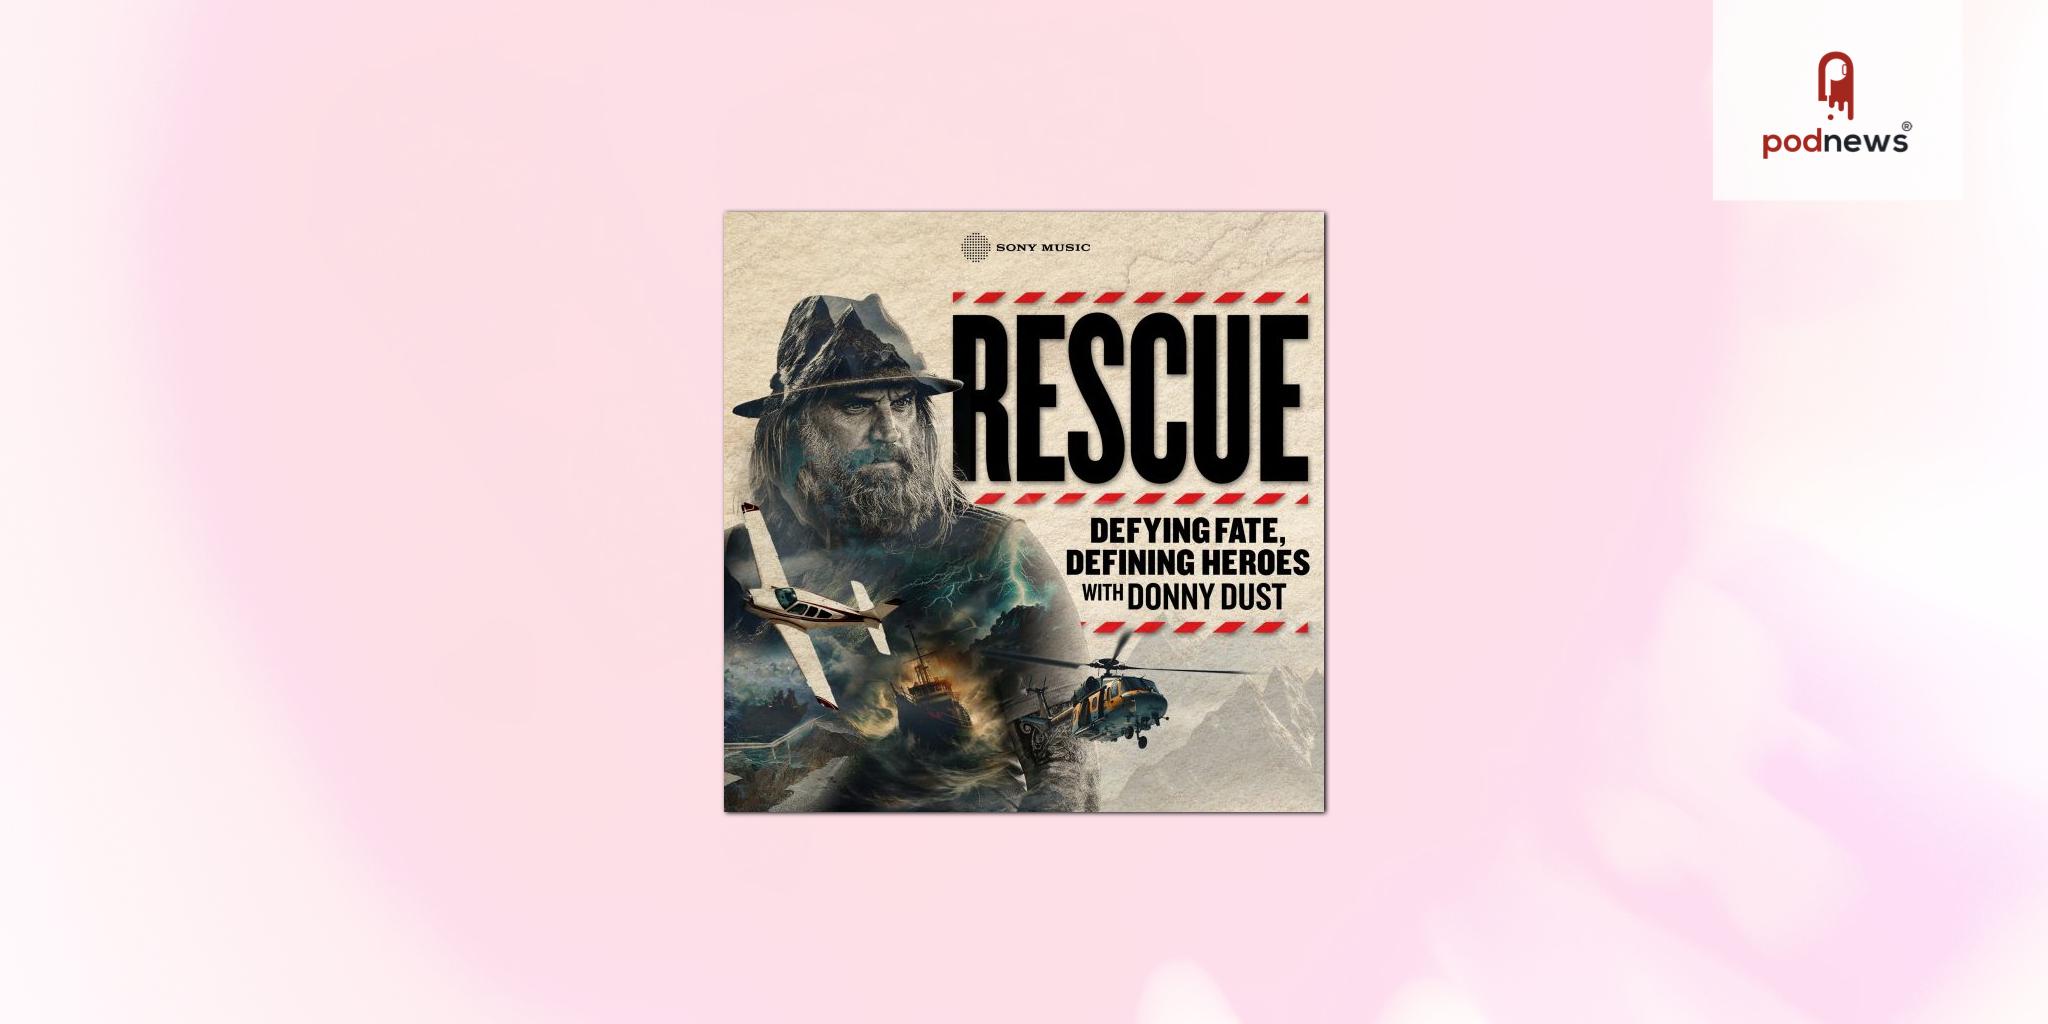 Sony Music Entertainment announces Rescue, a new podcast about the world's most astonishing rescue stories